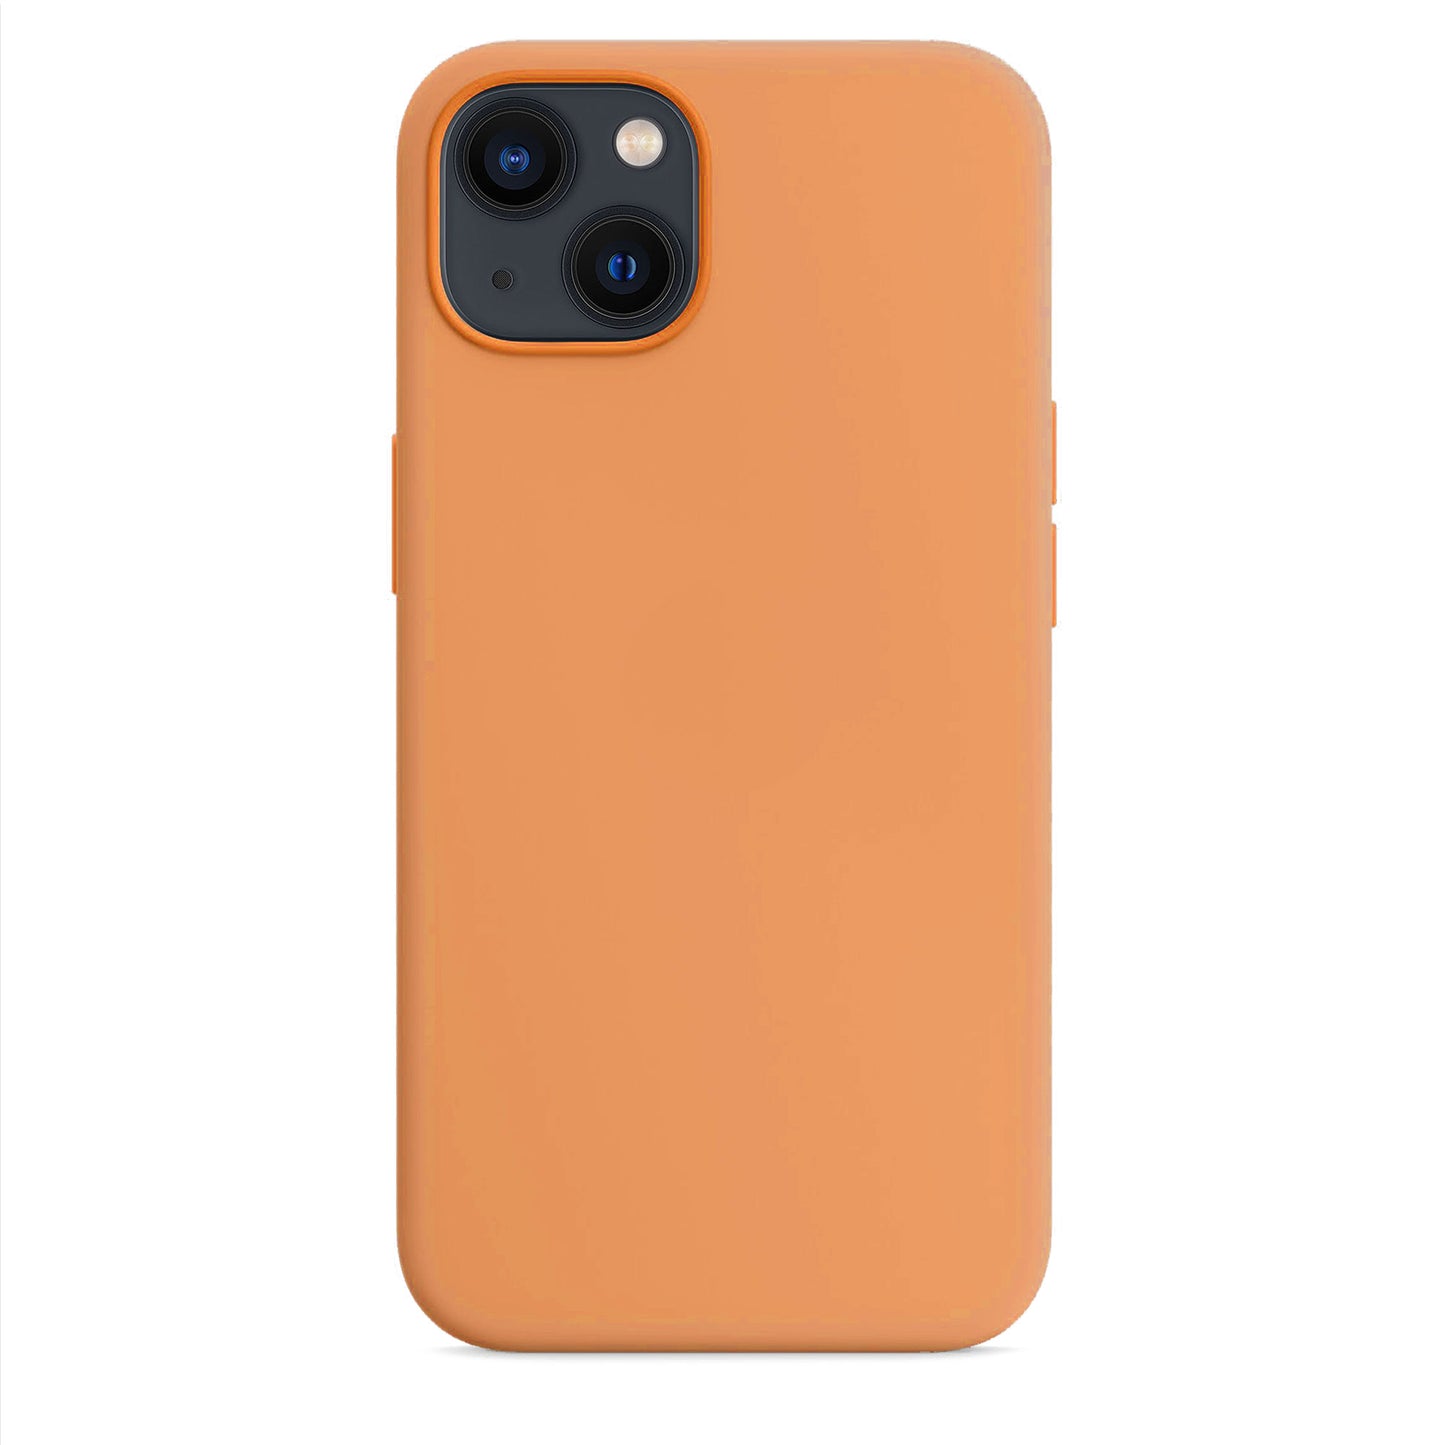 Marigold Silicone Case for iPhone